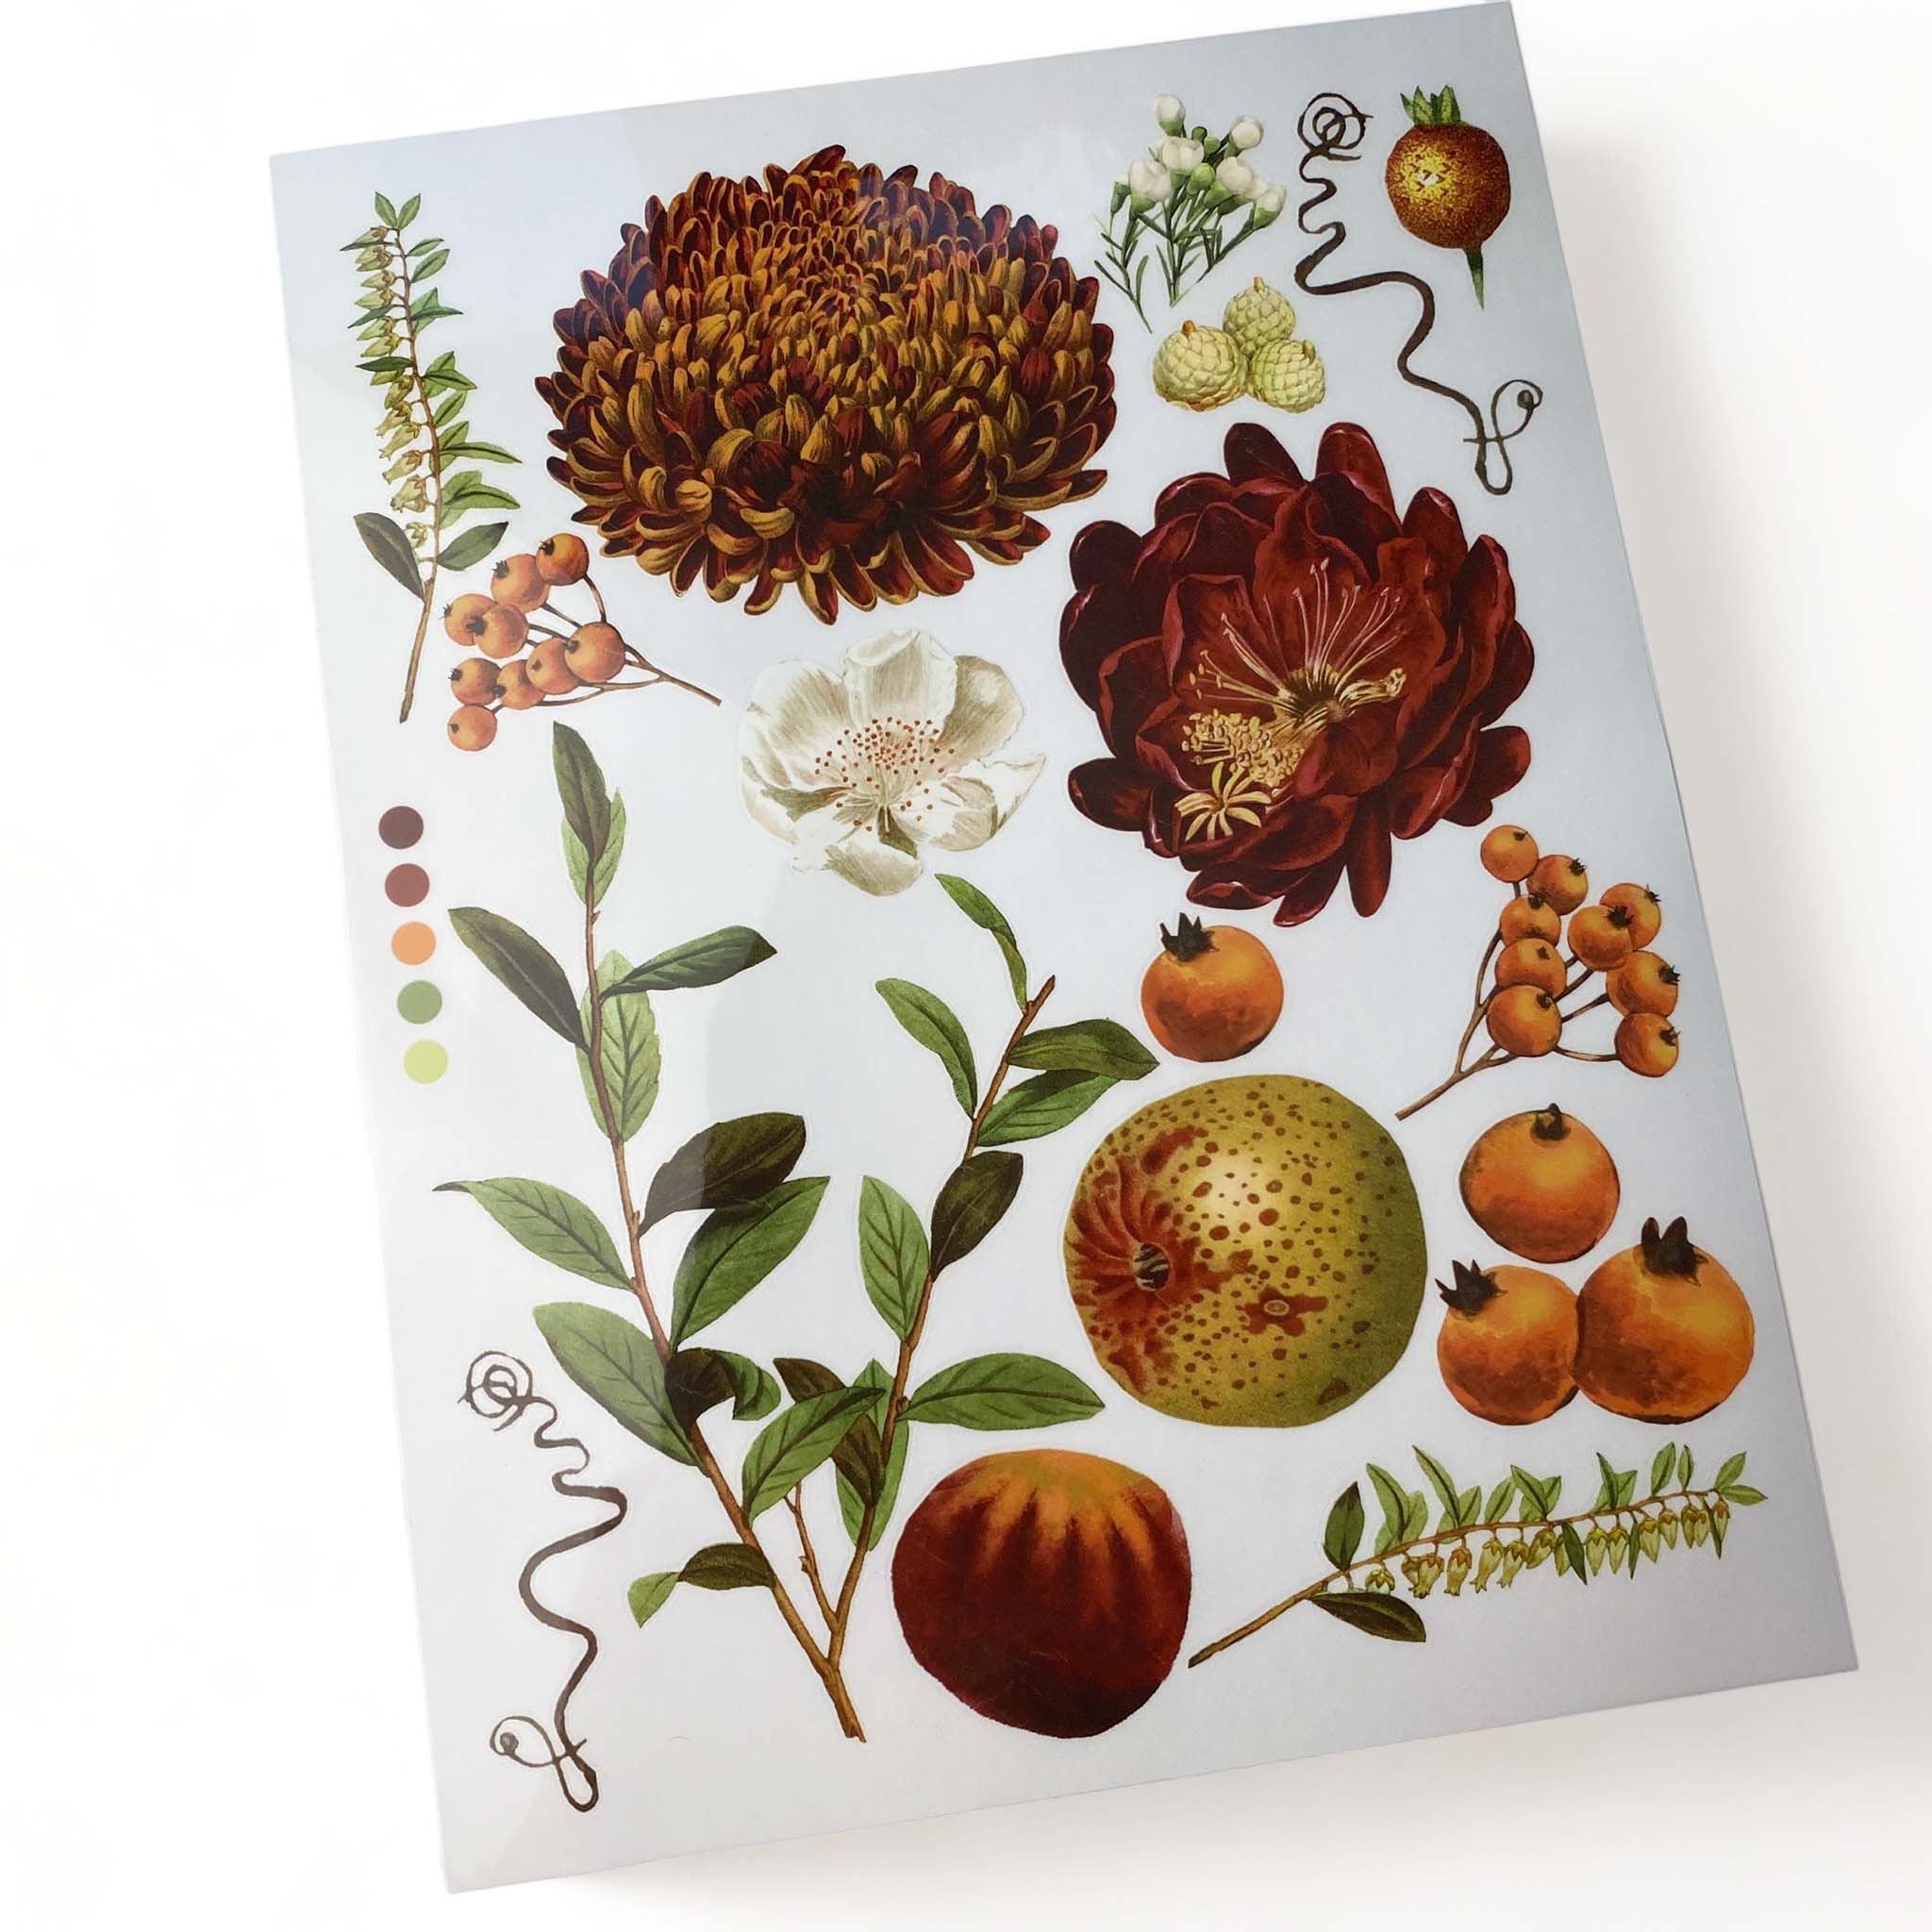 One sheet of ReDesign with Prima's Seasonal Splendor small rub-on transfer is against a white background.